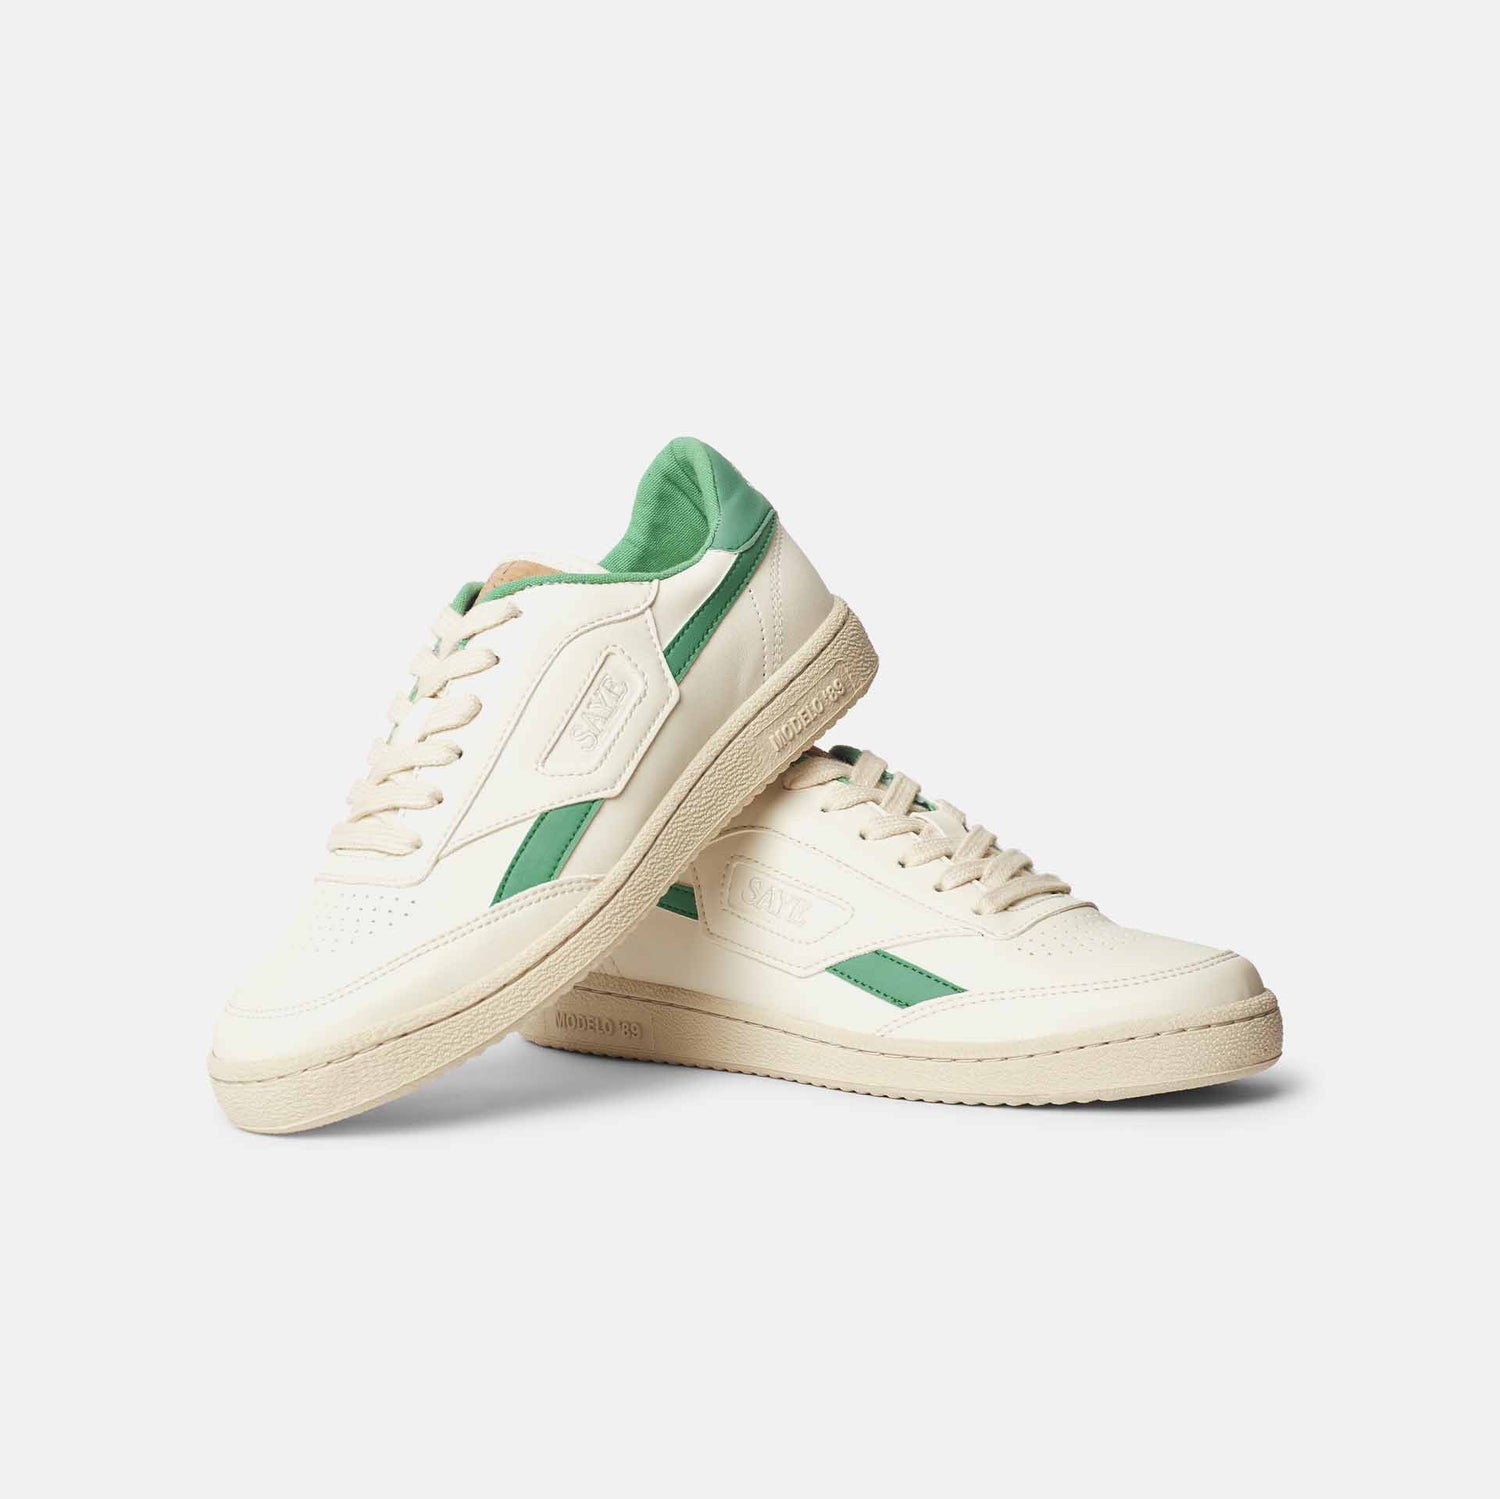 A pair of SAYE Modelo '89 Sneakers - Green on a white surface made with recycled and organic materials.